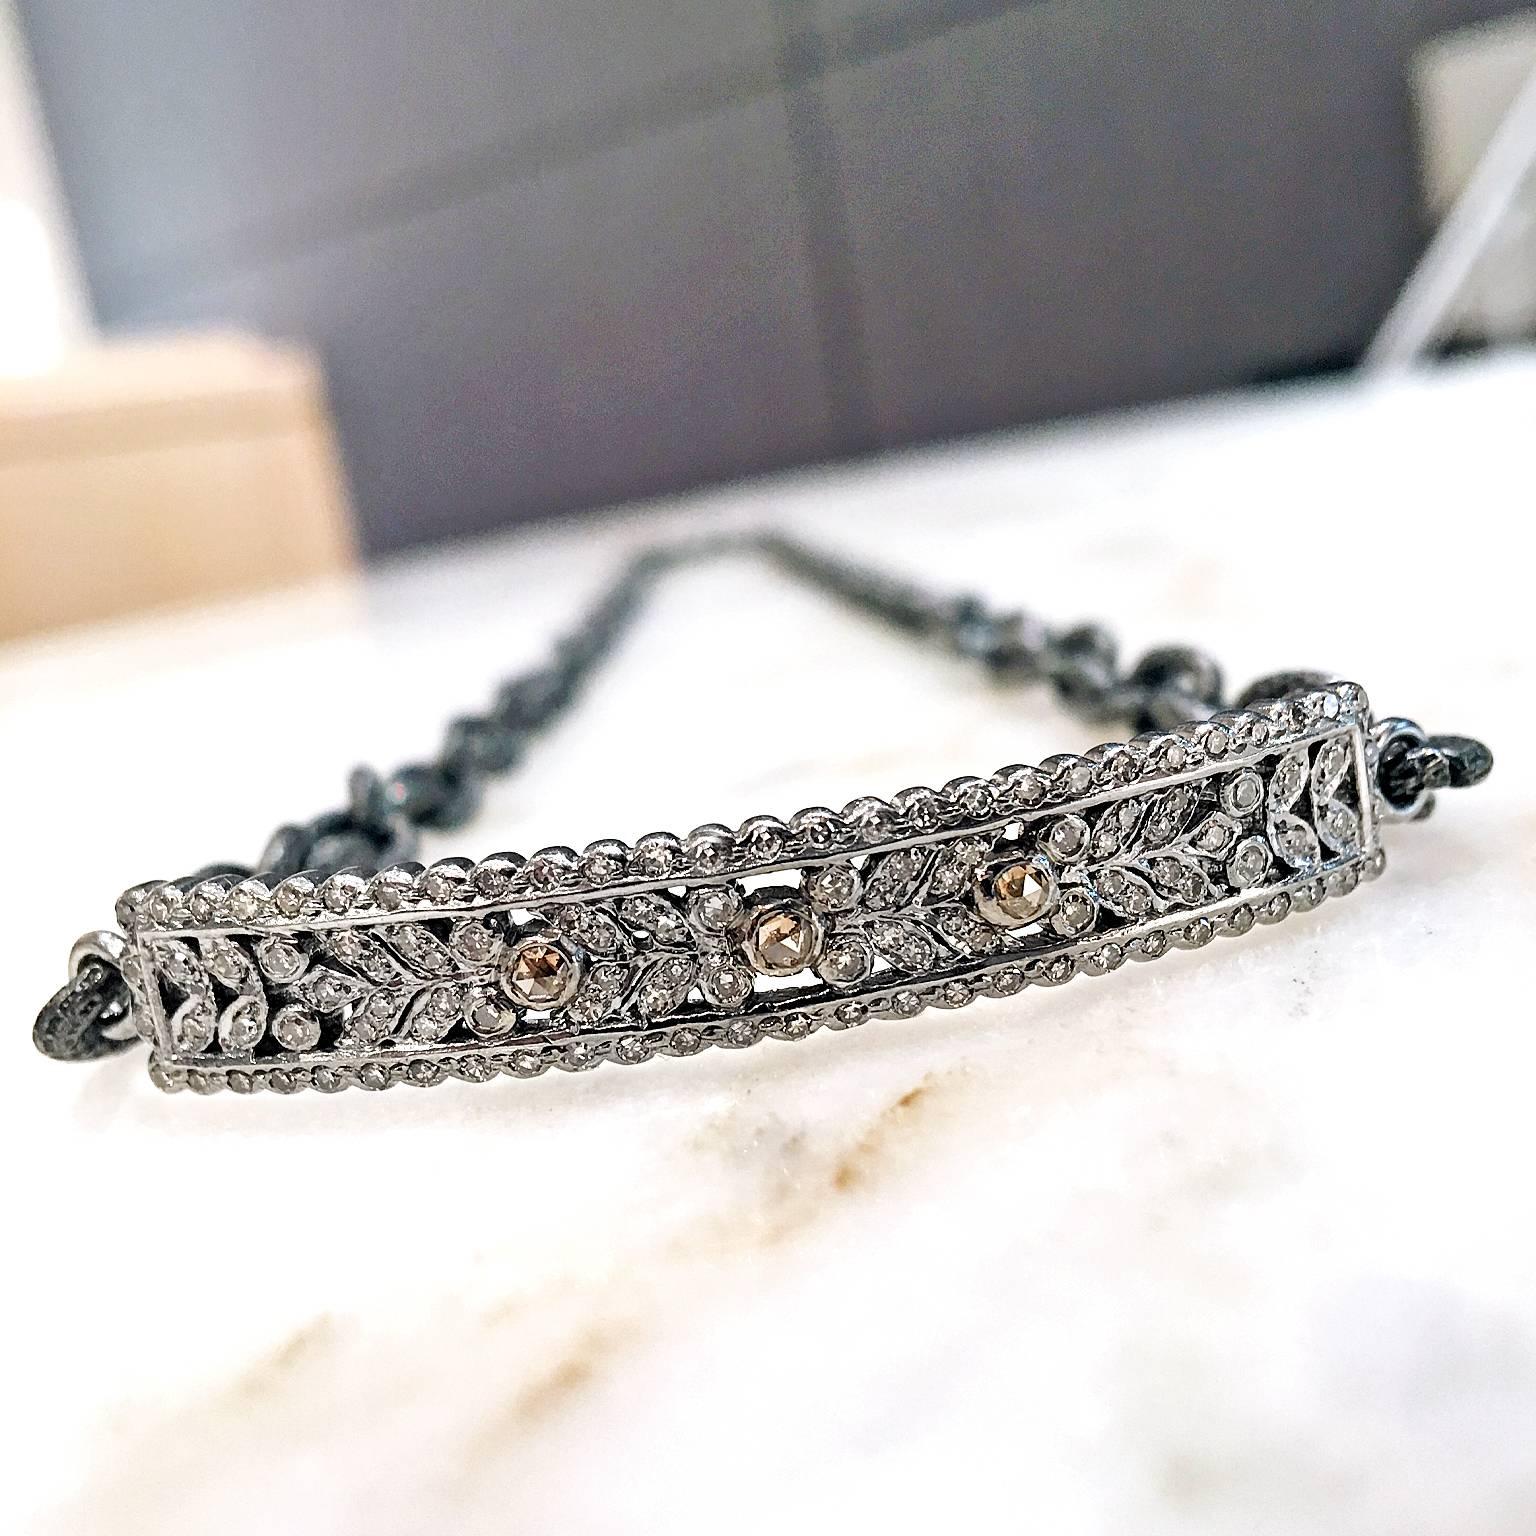 Double Wrap Bracelet handcrafted on a beautifully textured stainless steel chain featuring a curved sterling silver bar embedded with shimmering round brilliant-cut white diamonds and three rose-cut cognac diamond accents. 